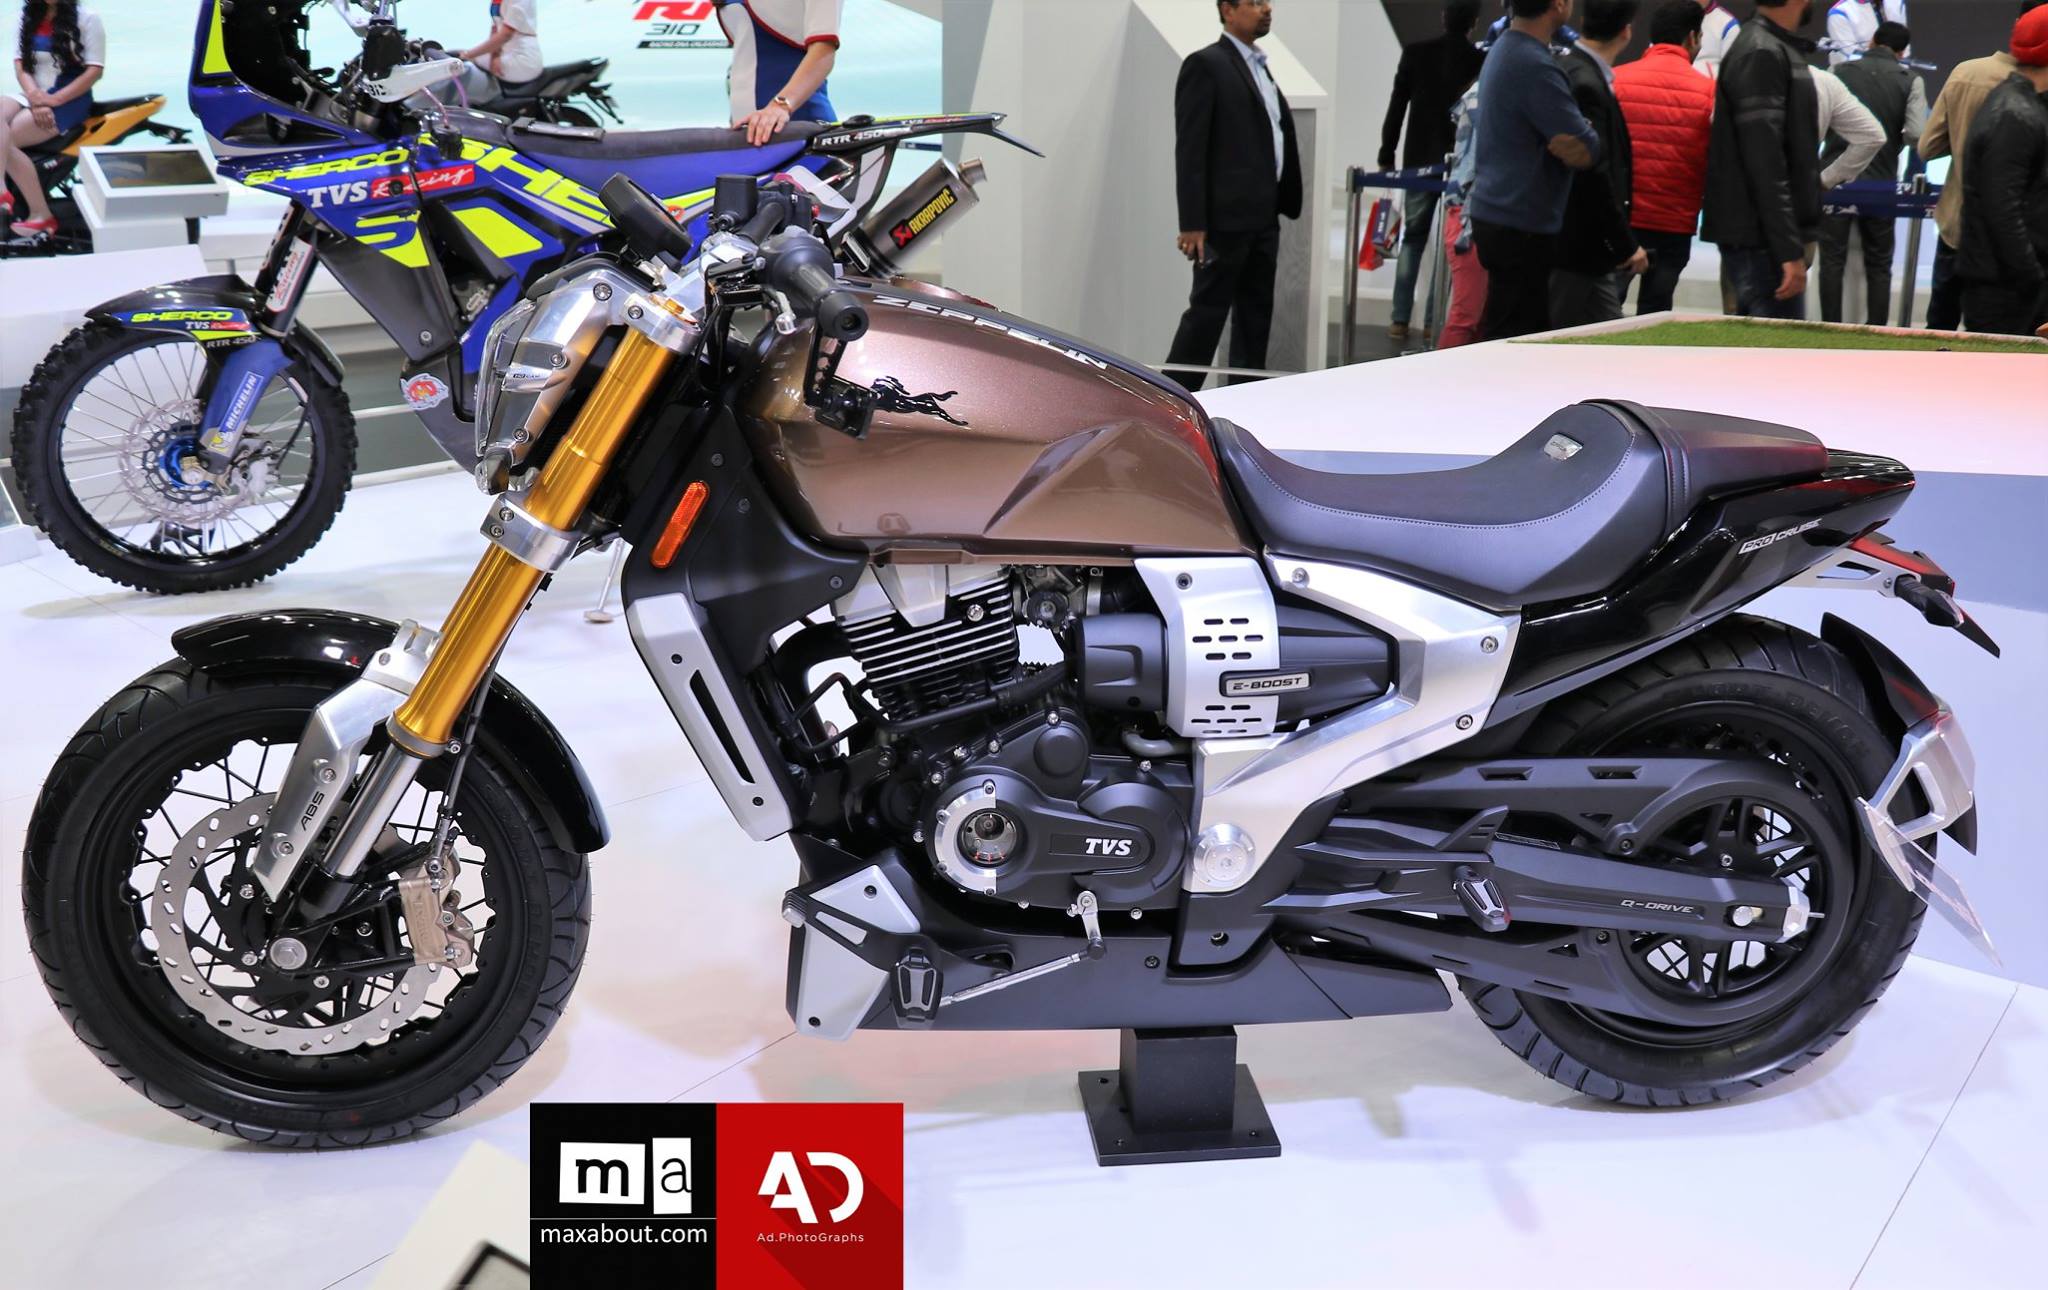 5 Quick Facts About the Upcoming TVS Cruiser Motorcycle - front